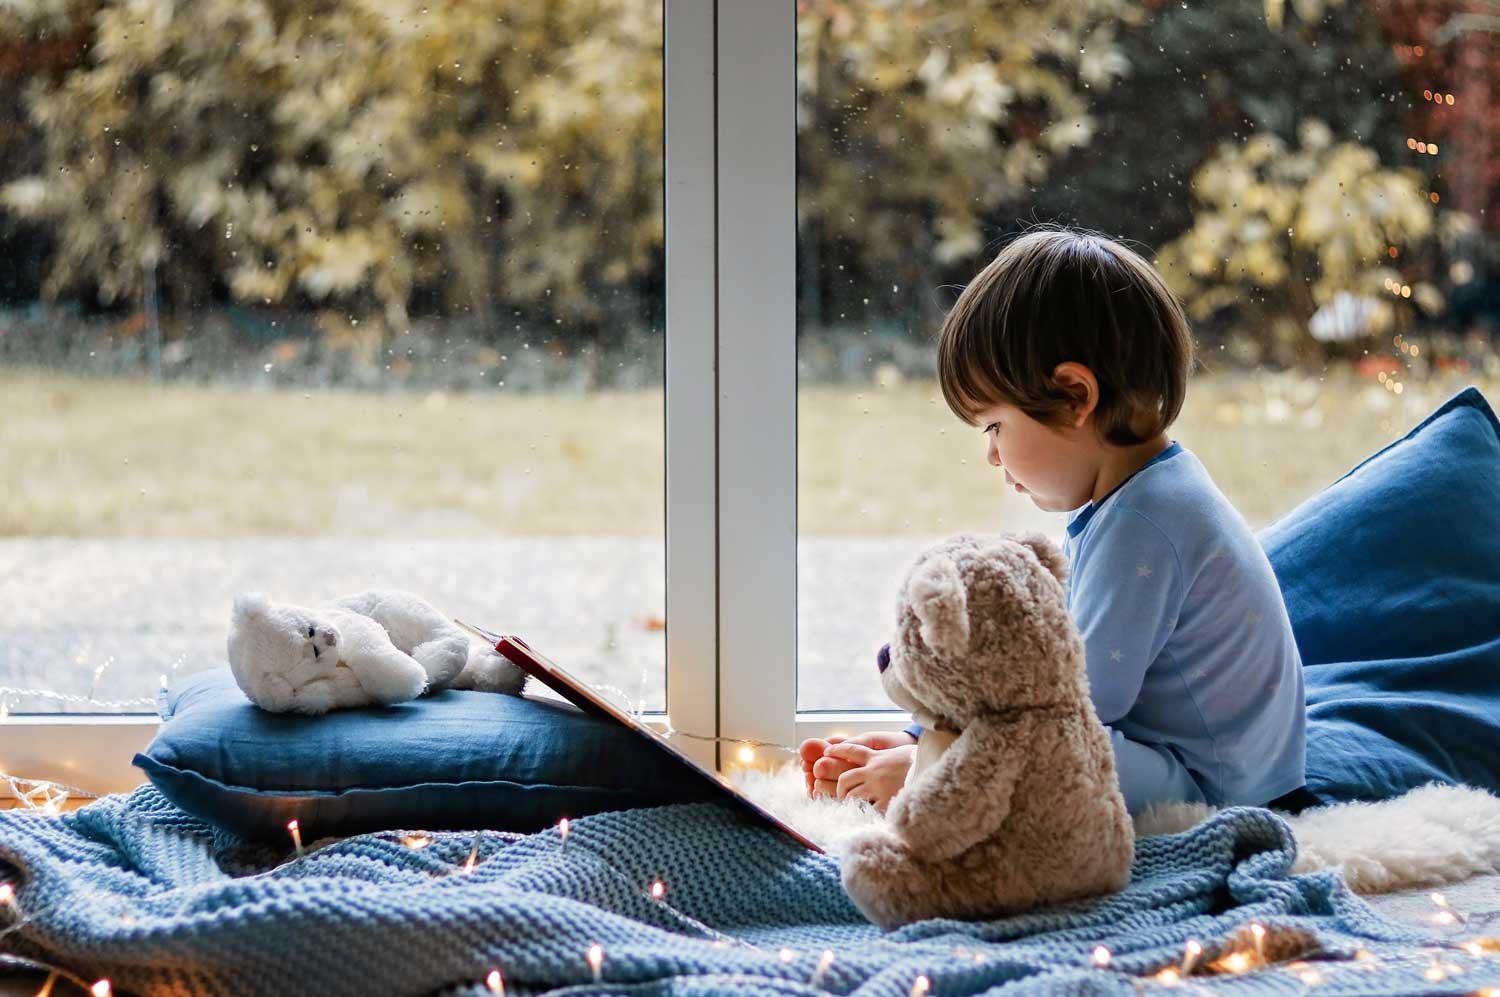 cute-little-boy-reading-book-with-his-teddy-bear-toy-sitting-cozy-on-pillows-and-knitted-blanket-near_t20_4bQ14R